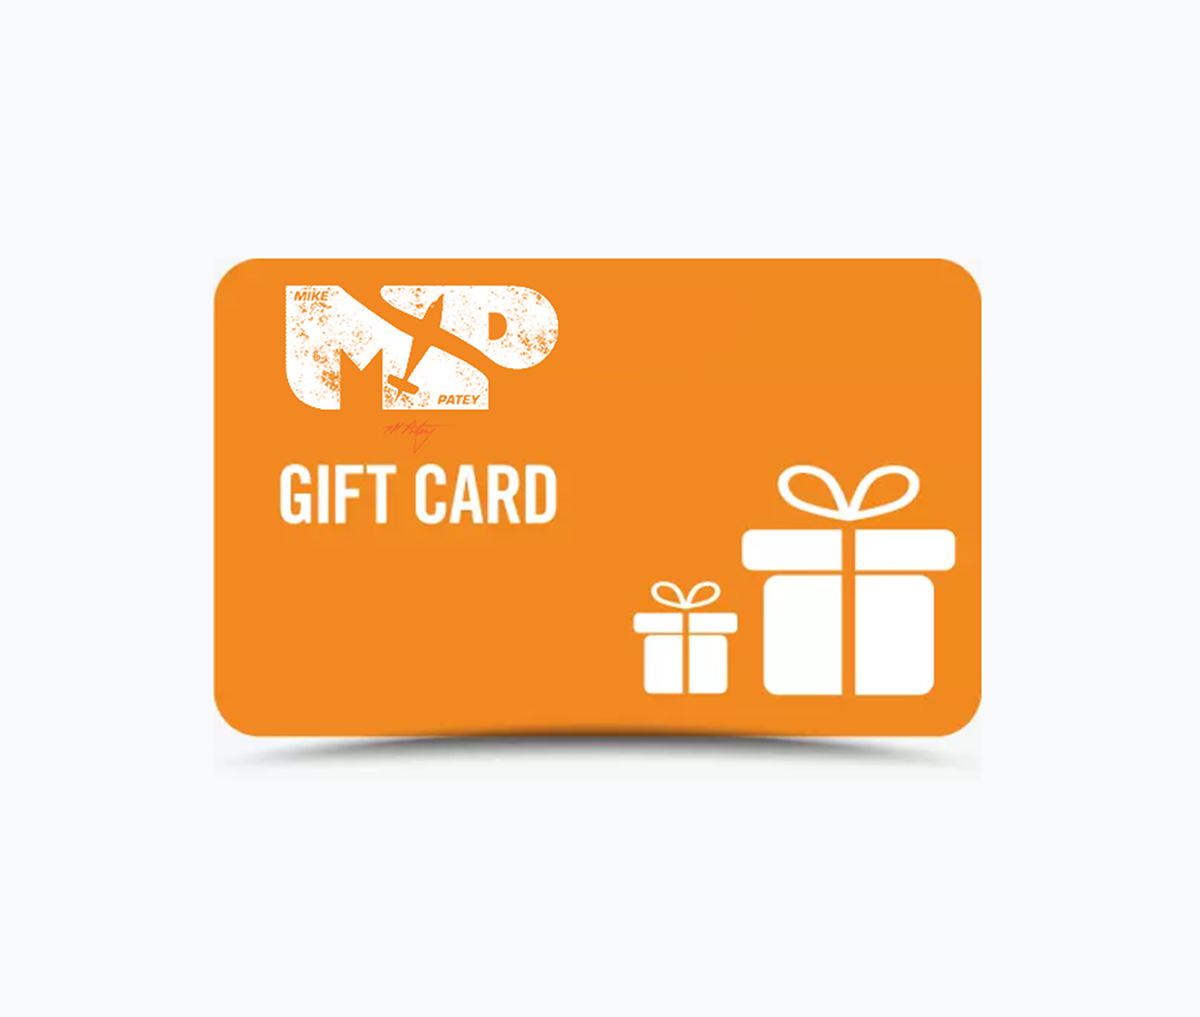 Mike Patey Gift Card